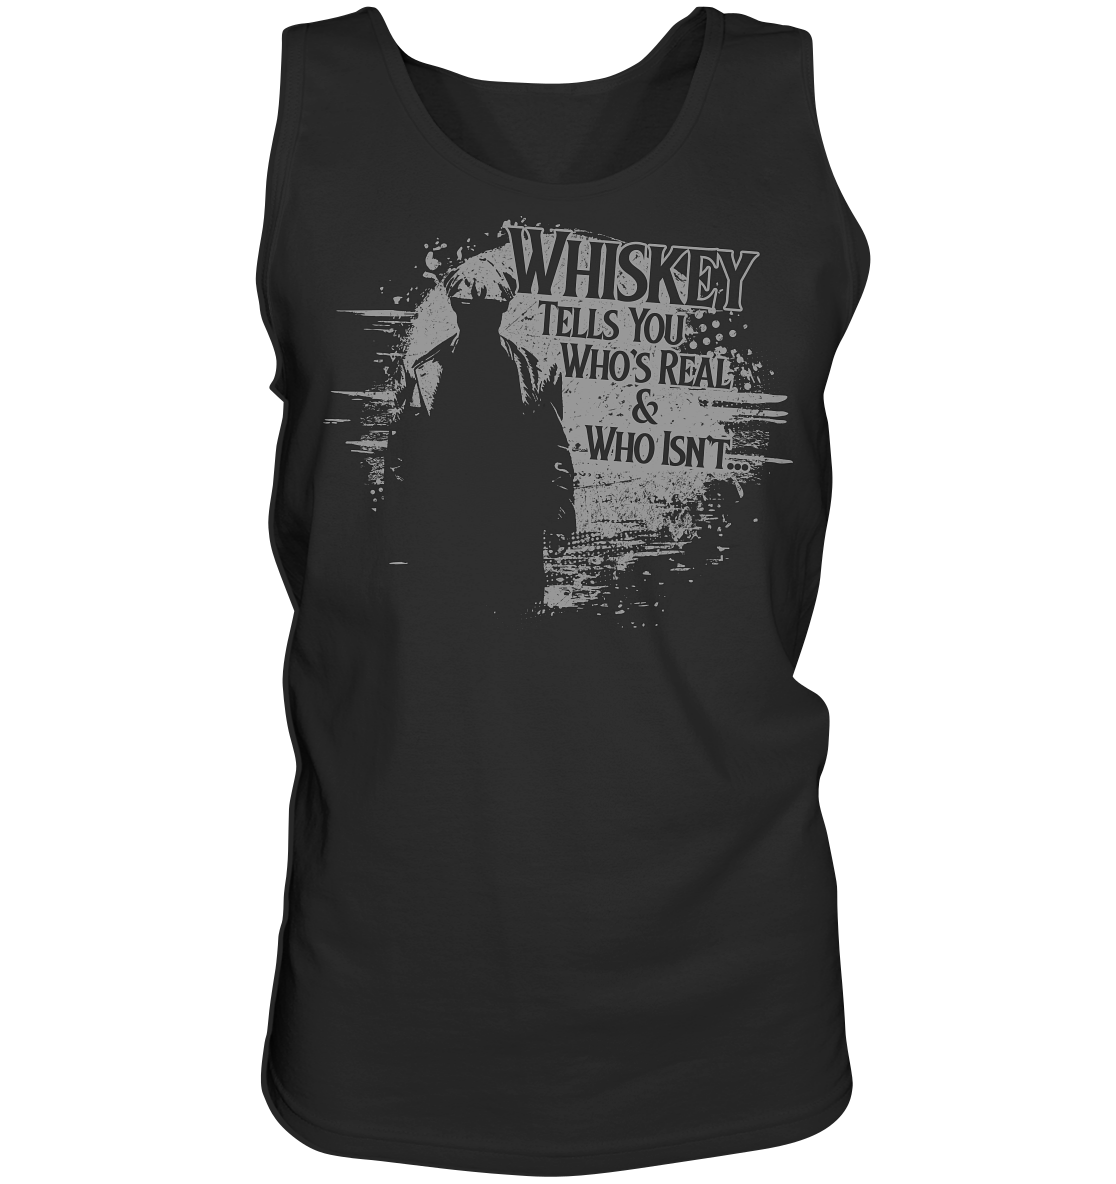 Whiskey Tells You Who's Real & Who Isn't - Tank-Top